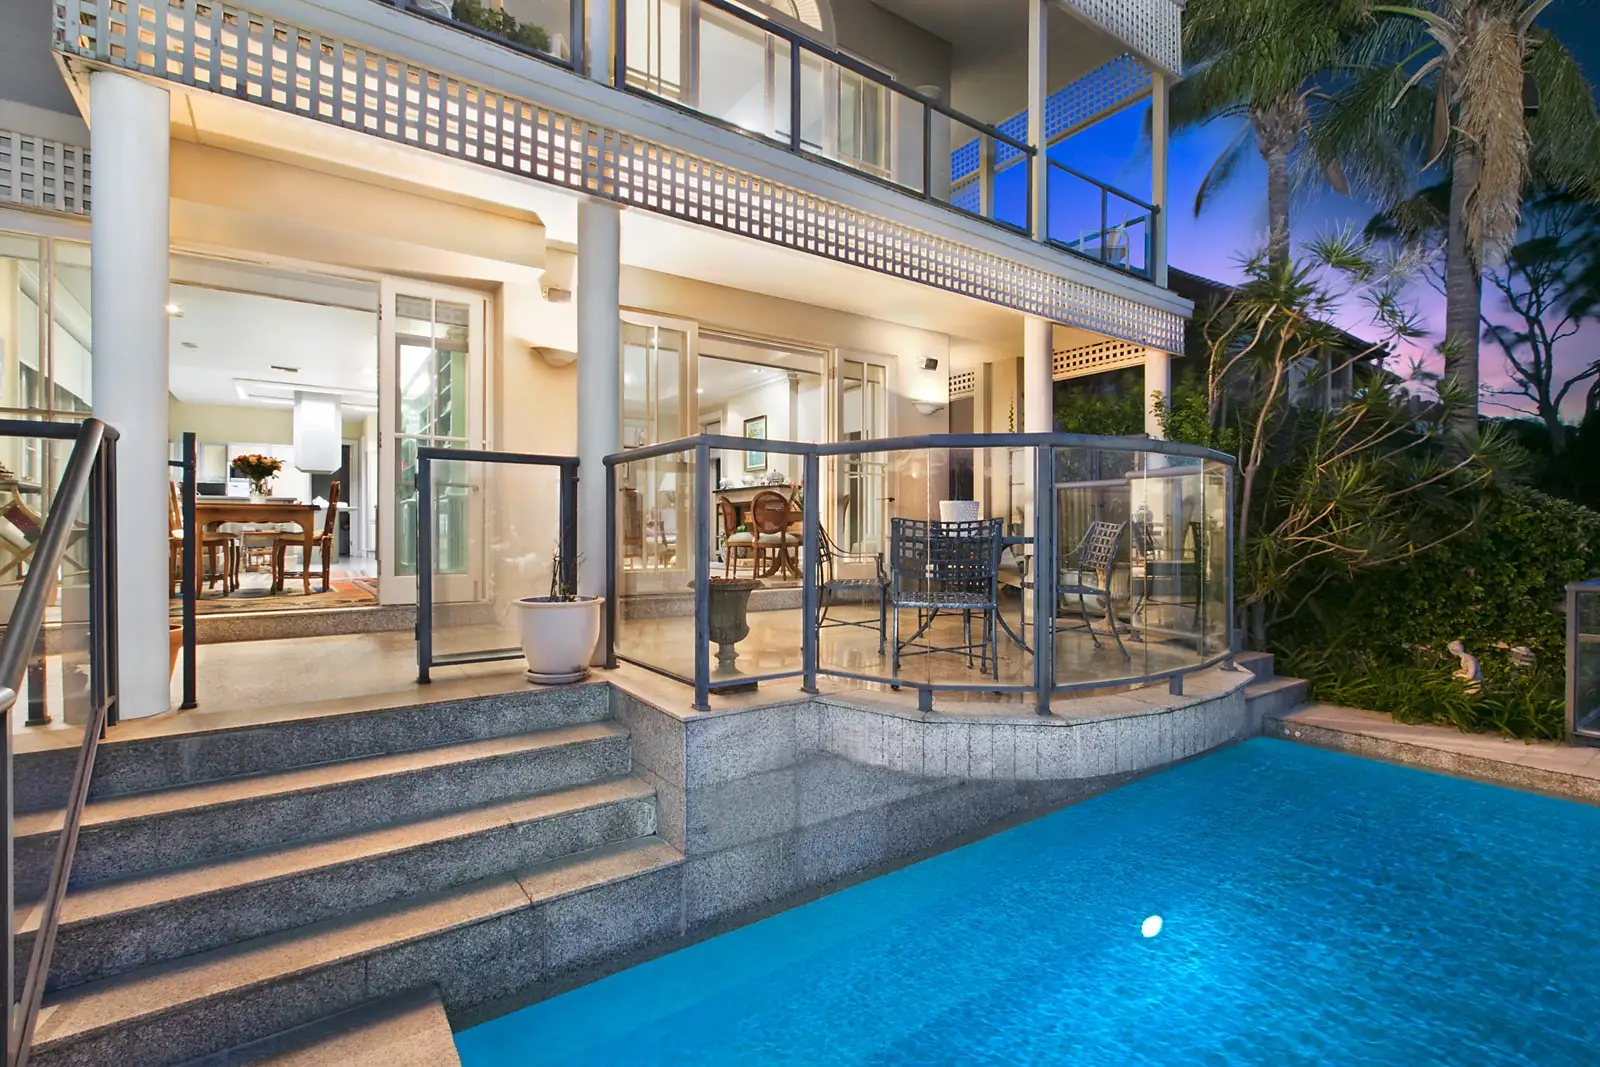 Photo #3: 14 Wentworth Place, Point Piper - Sold by Sydney Sotheby's International Realty